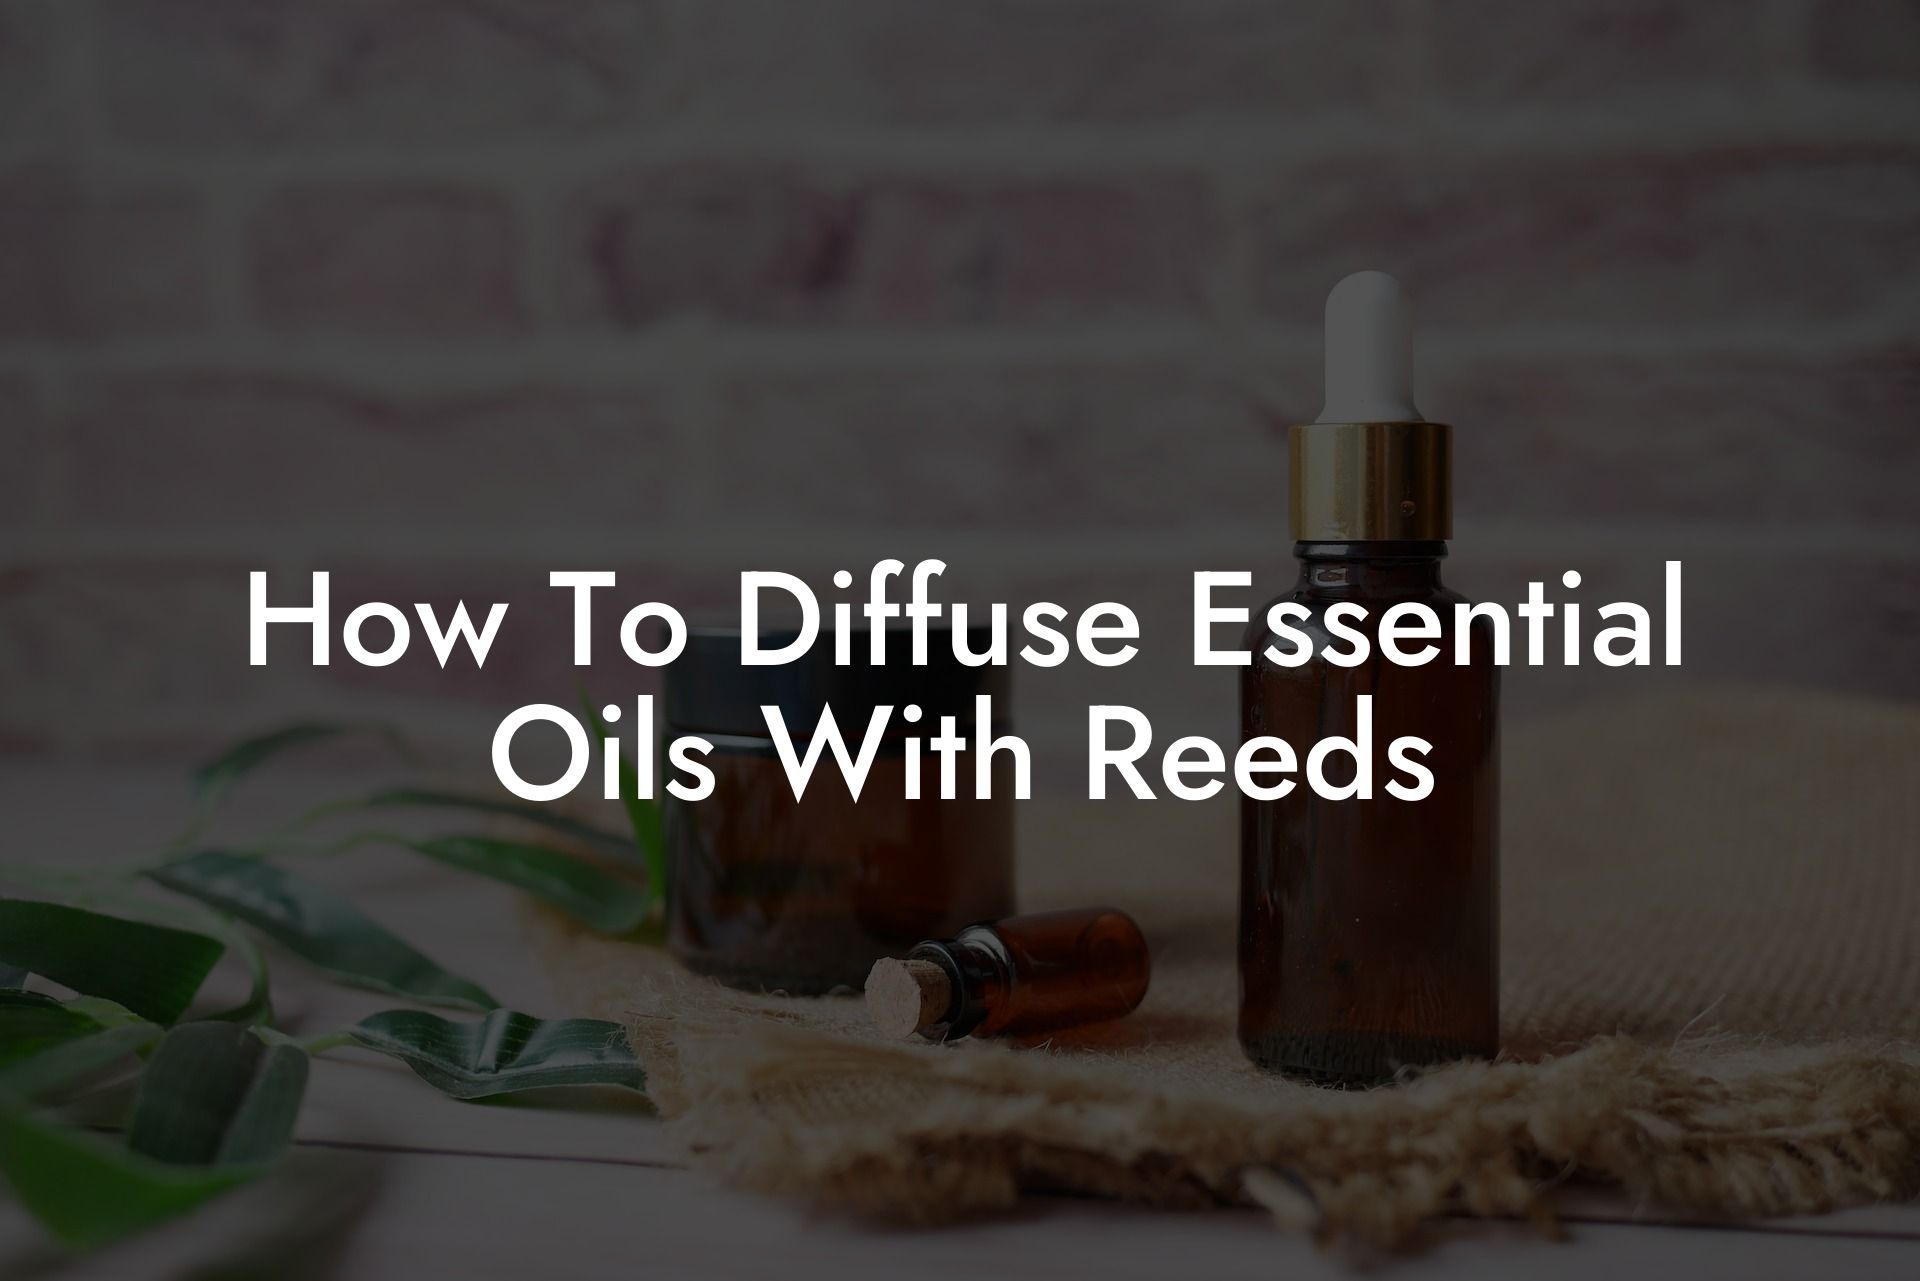 How To Diffuse Essential Oils With Reeds